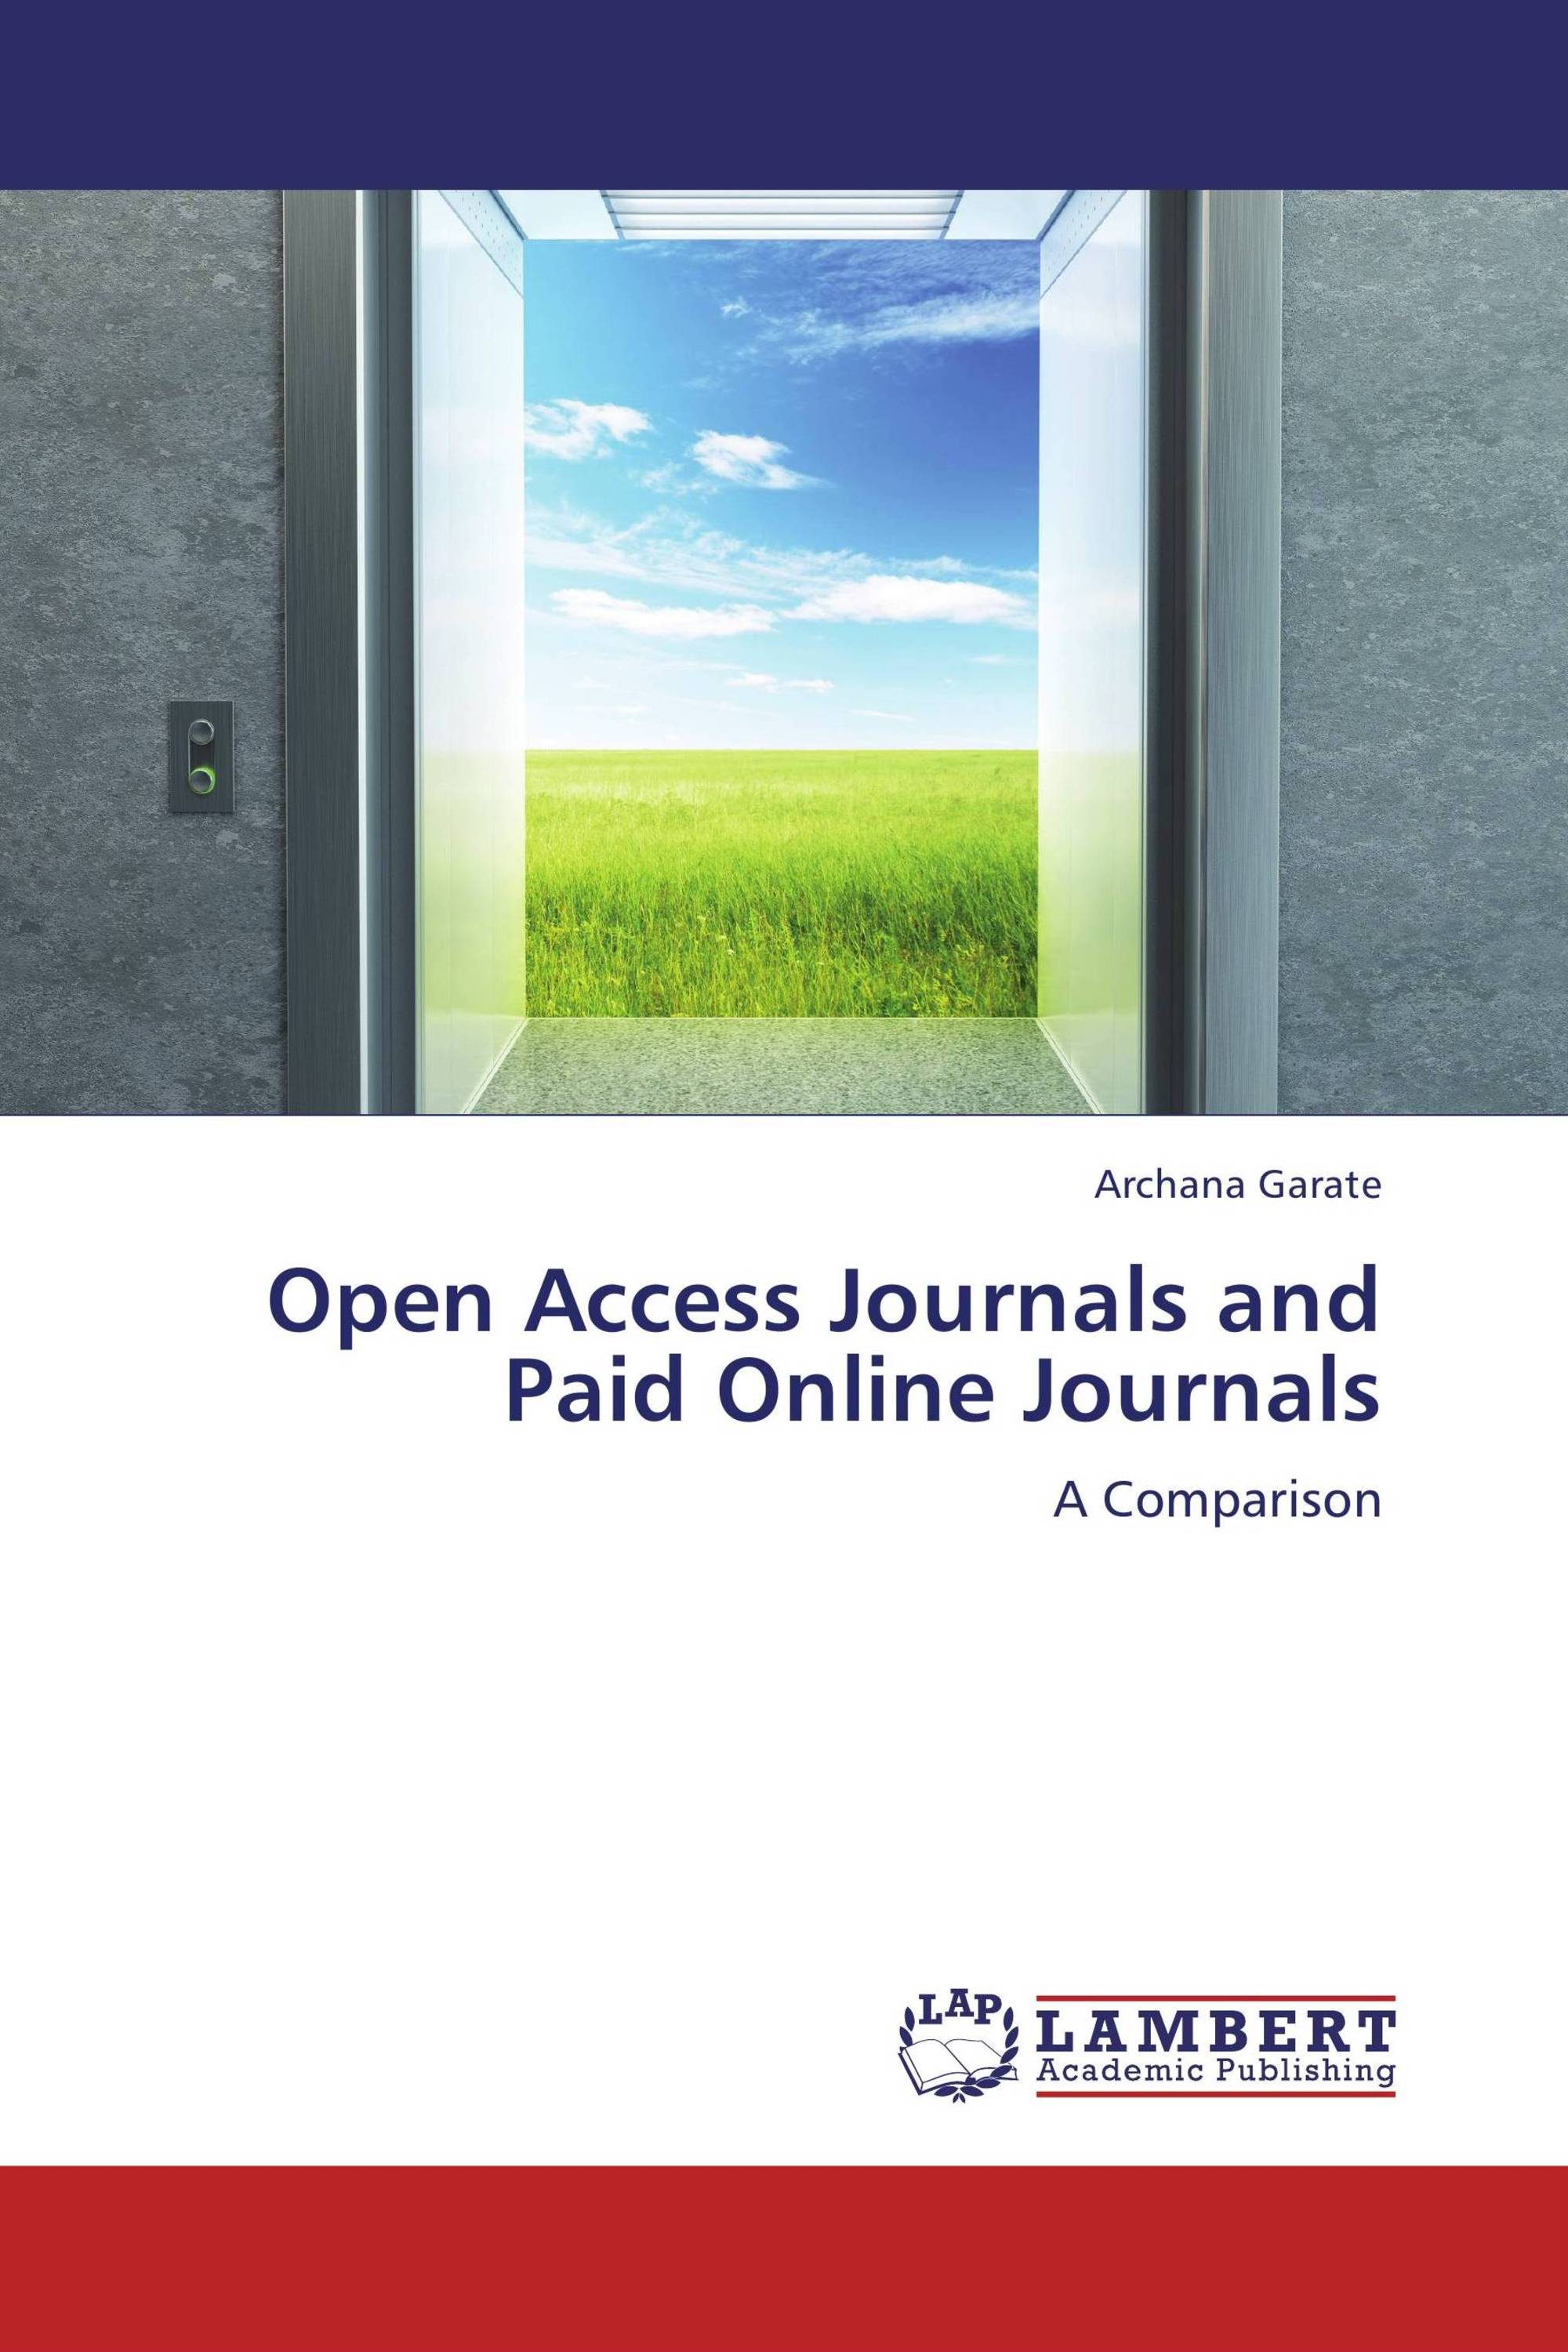 Open Access Journals and Paid Online Journals